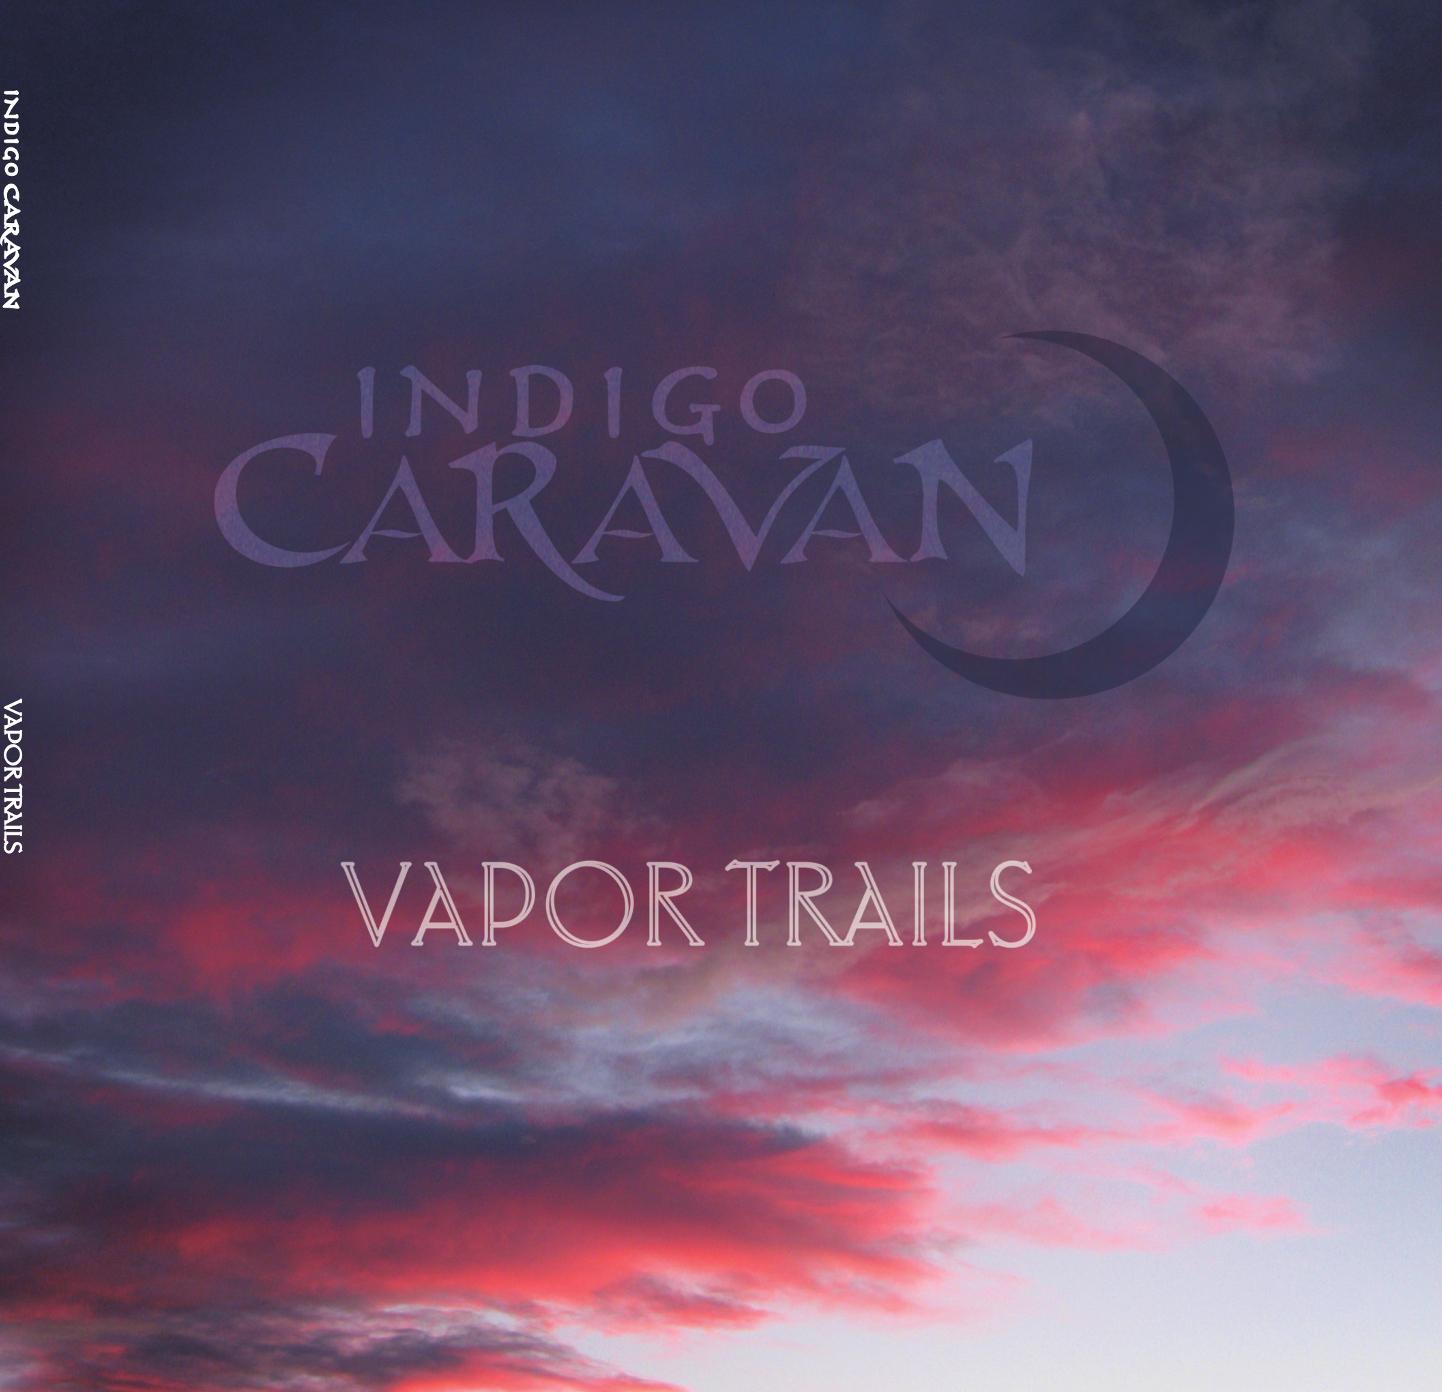 Indigo Caravan, Vapor Trails, 2014, available at shows, by mail, CDbaby, and more!